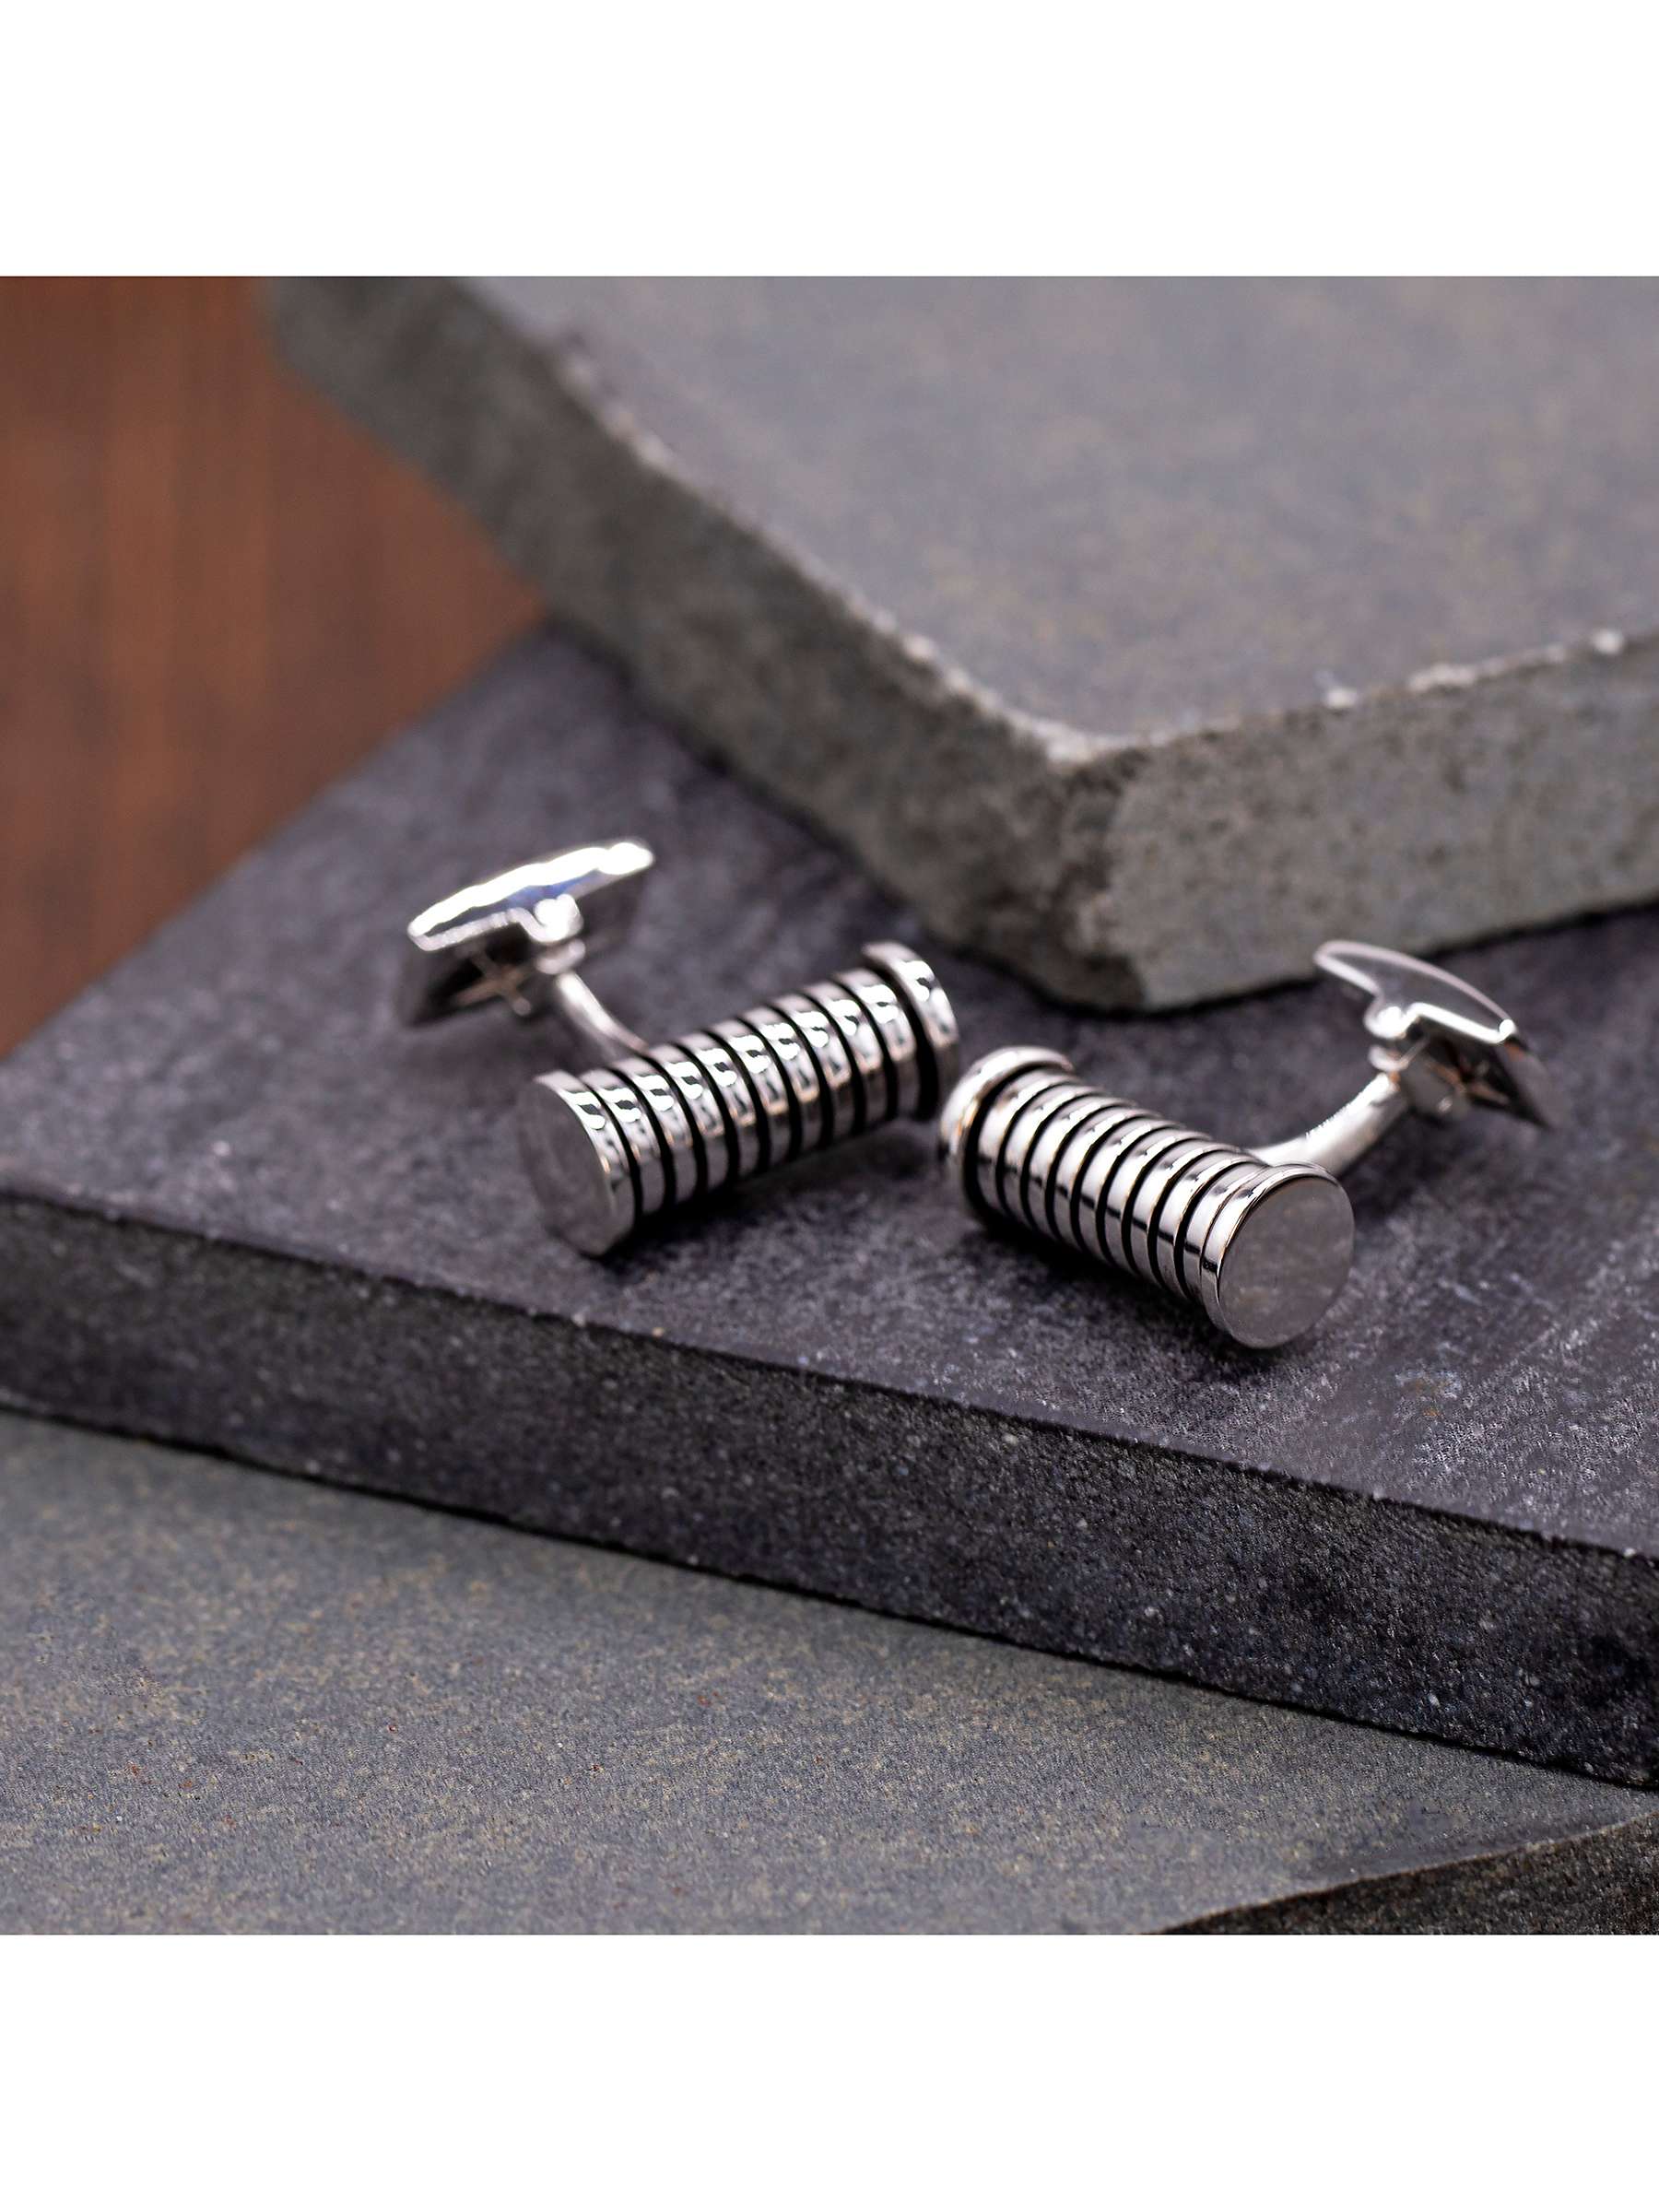 Buy Hoxton London Striped Cylindrical Cufflinks, Silver Online at johnlewis.com